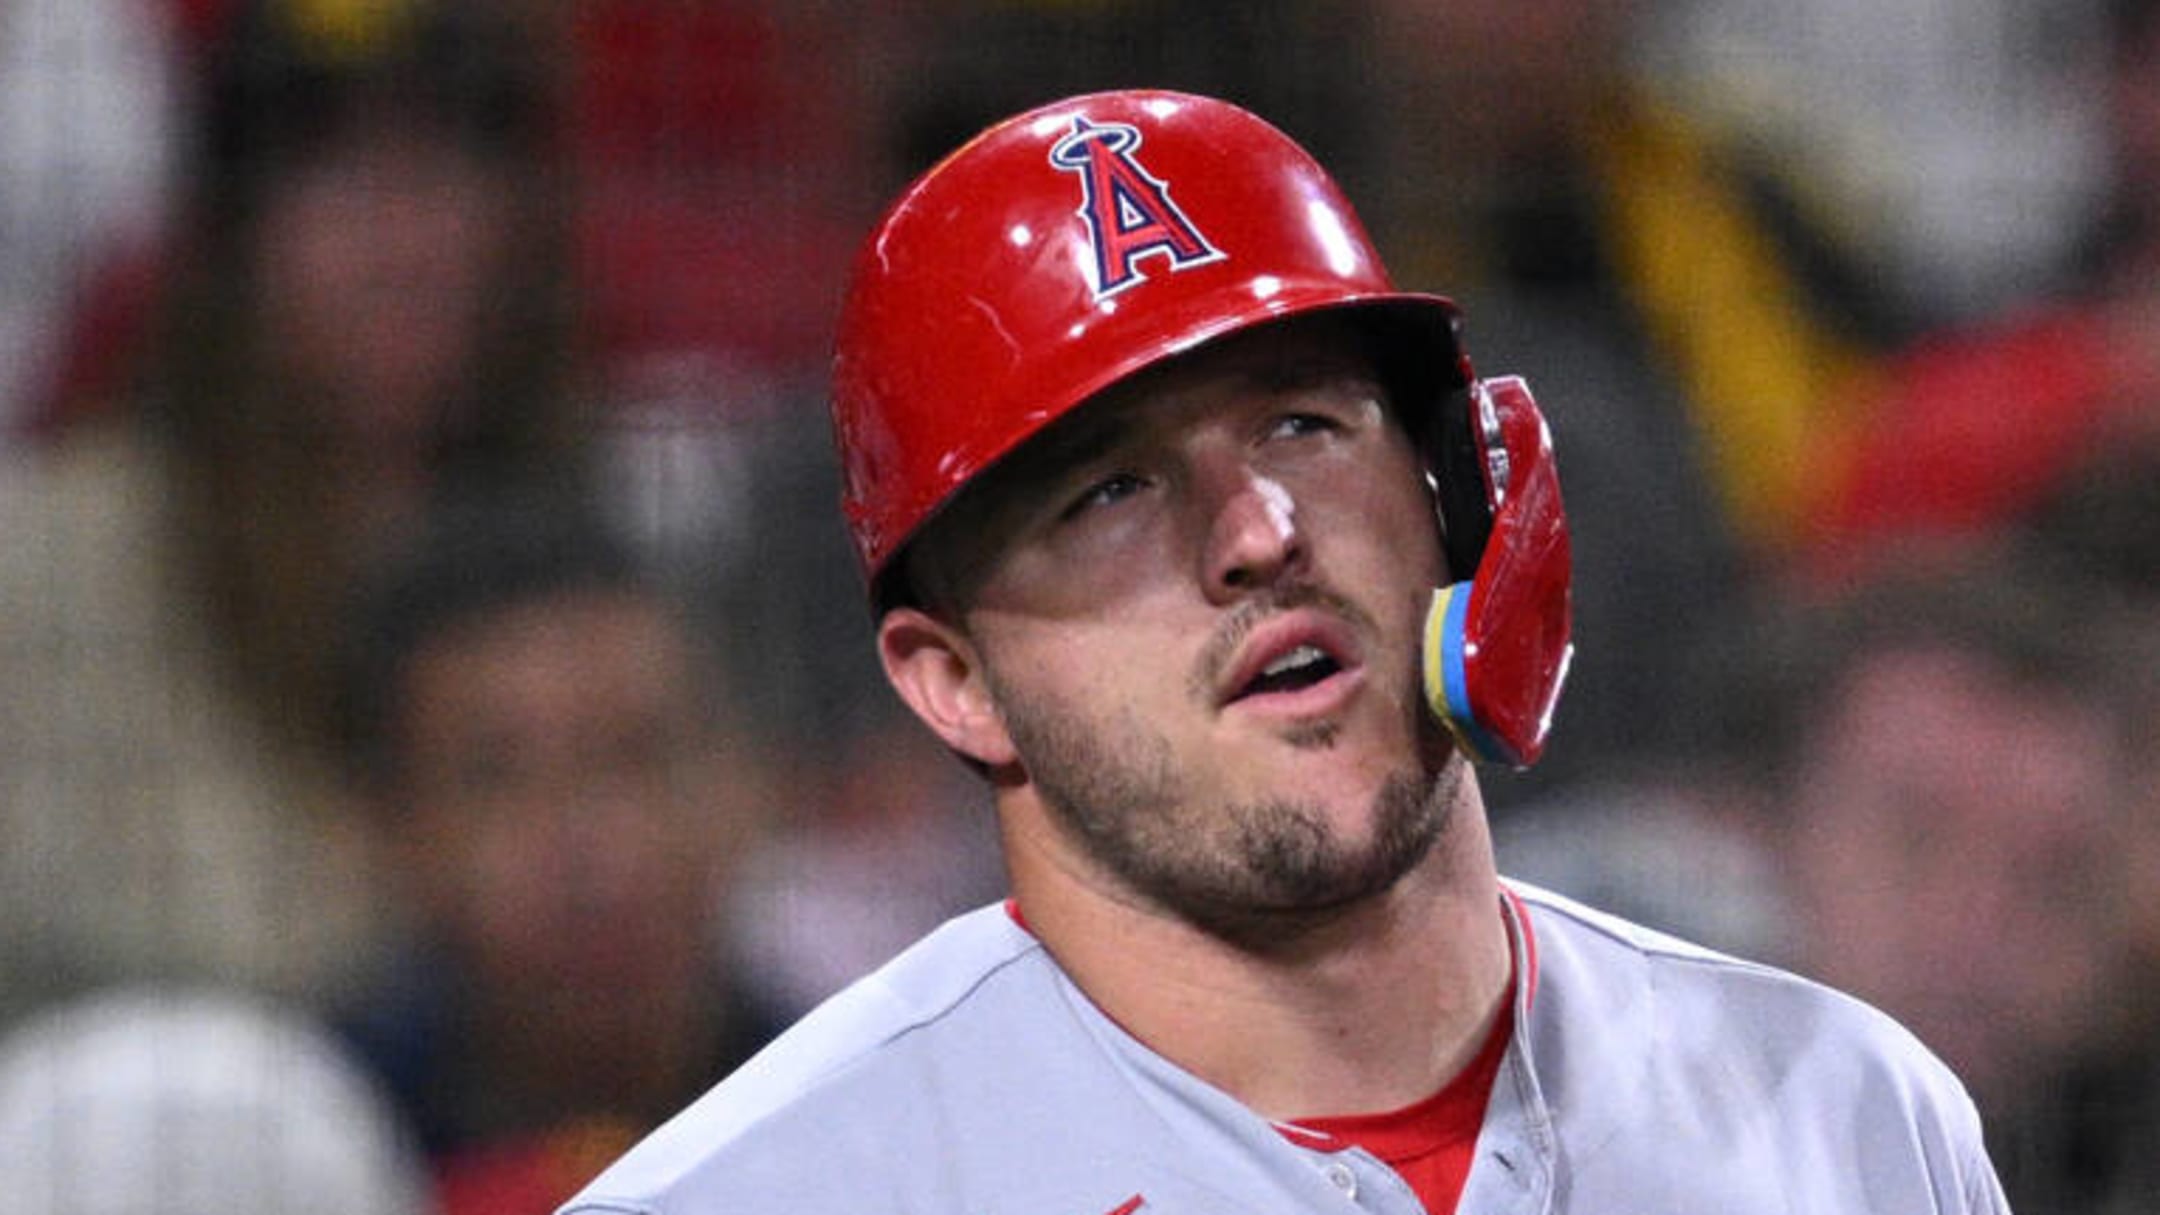 Angels place Mike Trout on IL with left hamate fracture